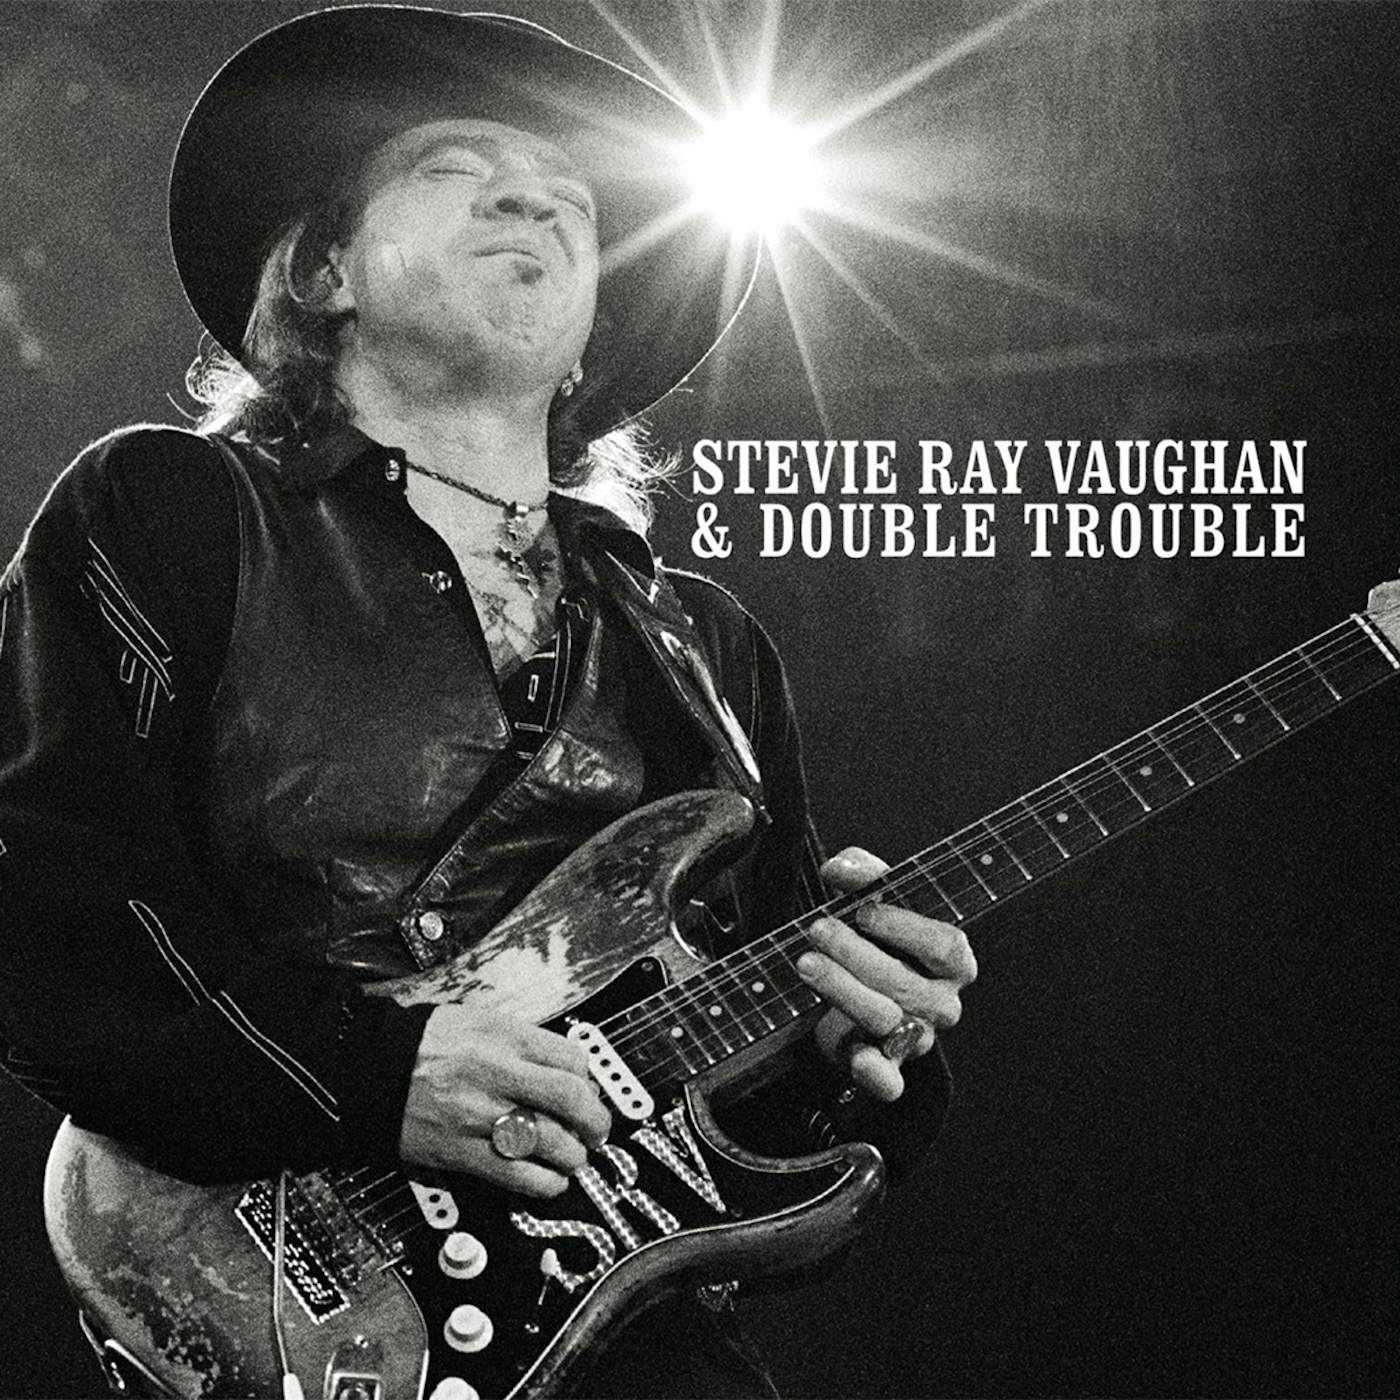 Stevie Ray Vaughan The Real Deal: Greatest Hits Volume 1 CD